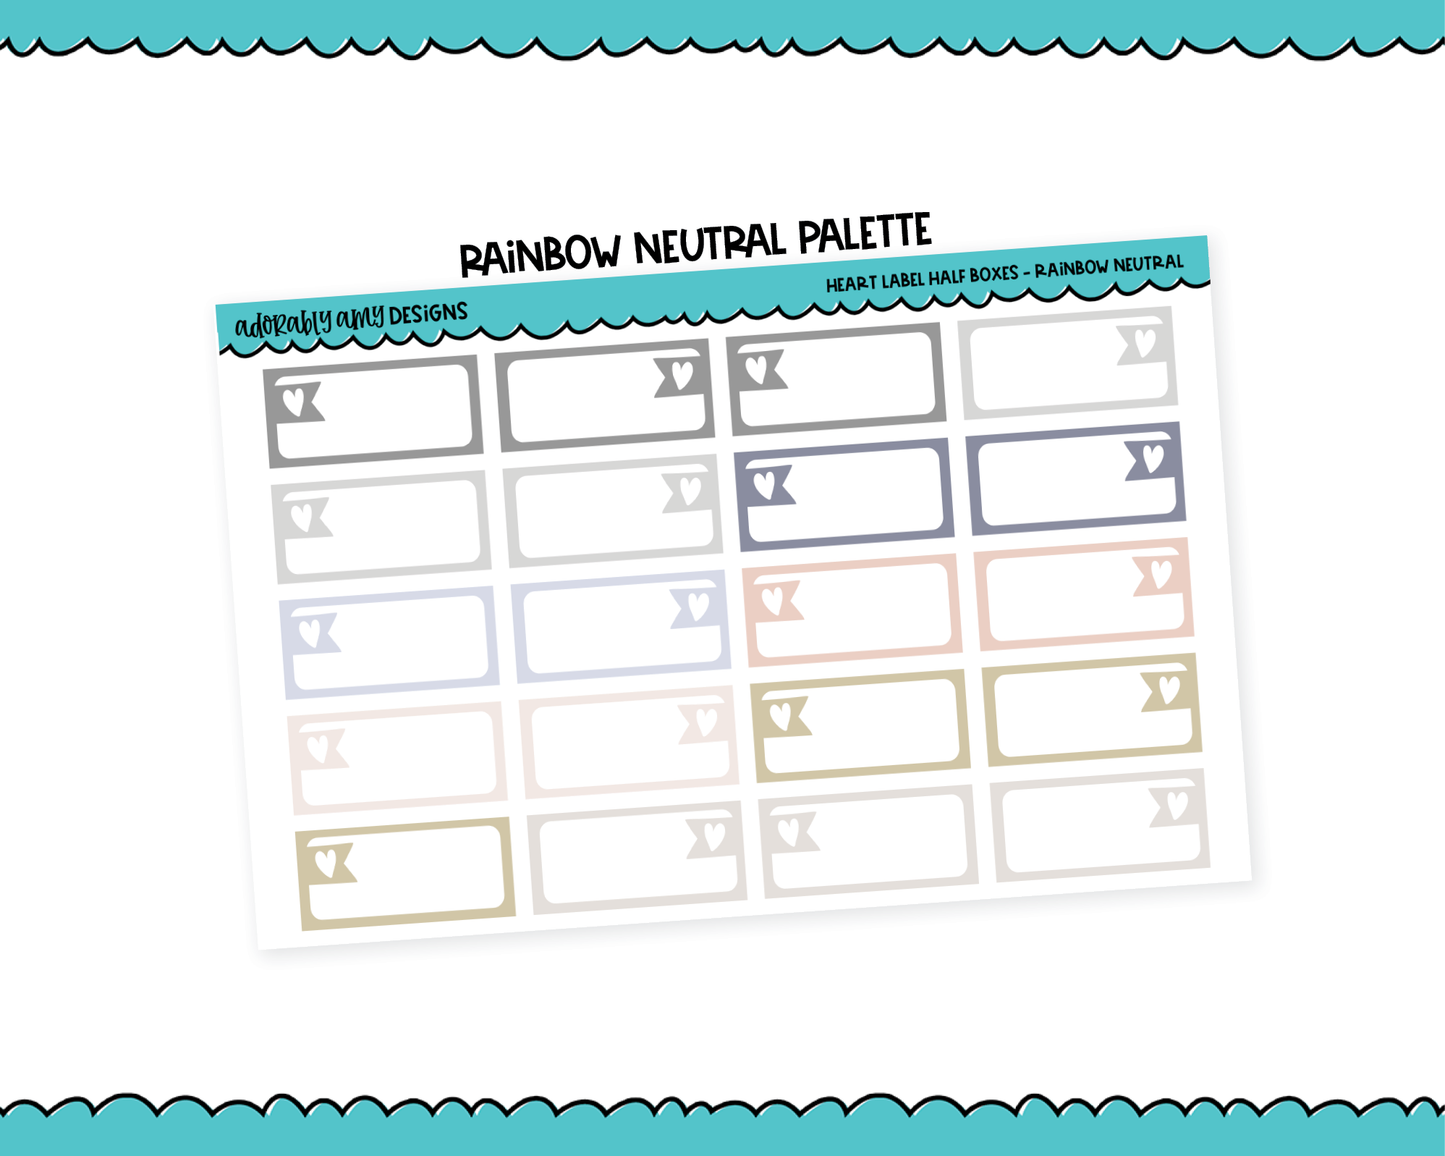 Rainbow Heart Label Half Box Reminder Planner Stickers for any Planner or Insert - Adorably Amy Designs